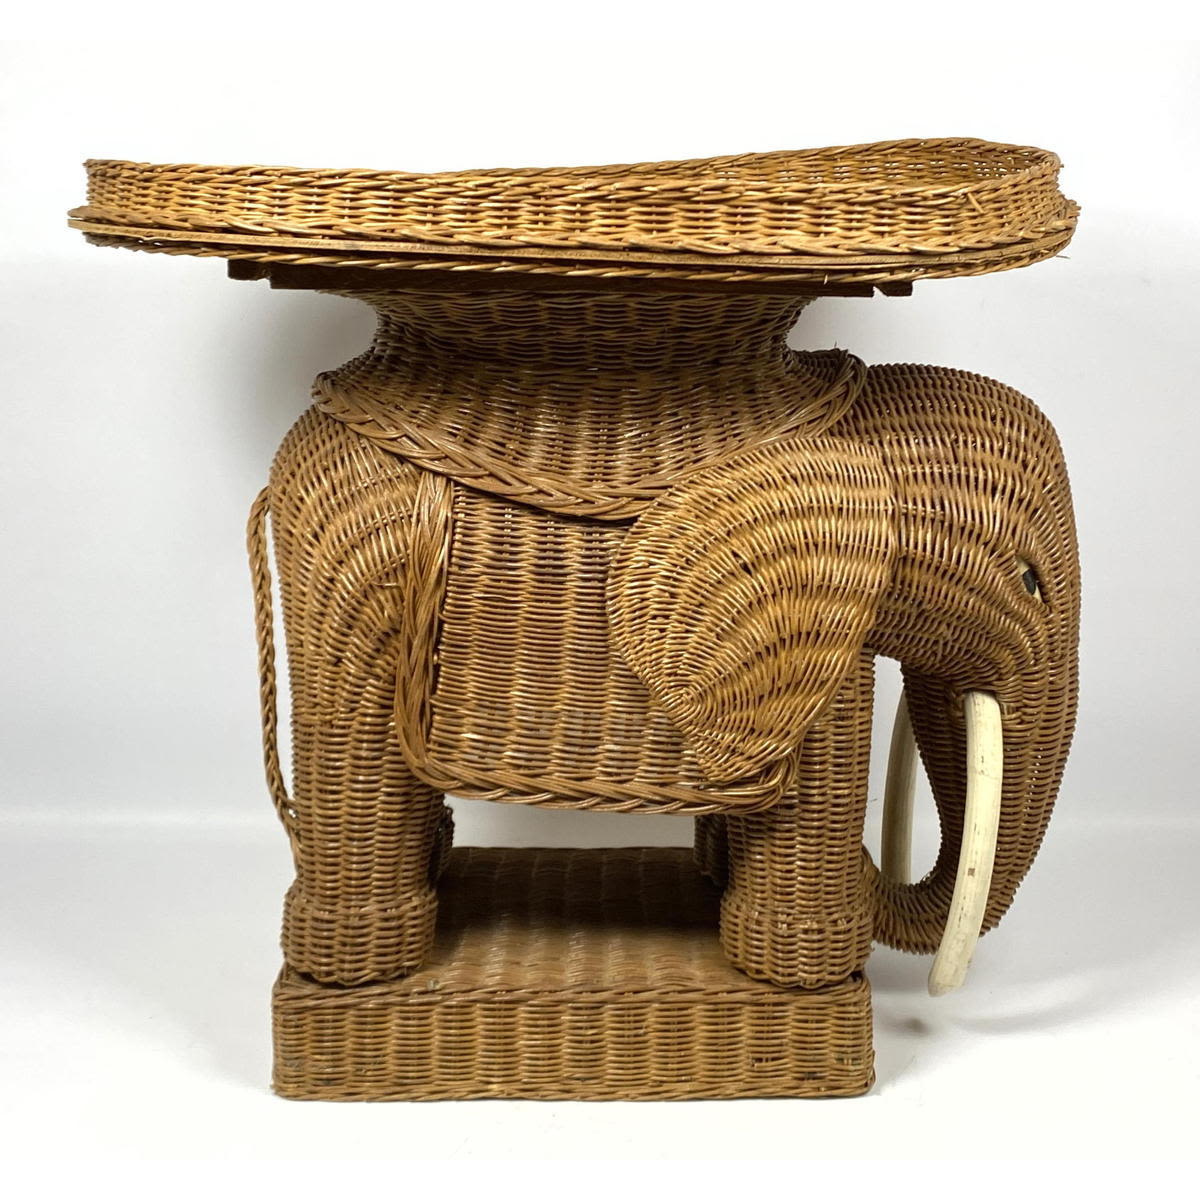 Figural Elephant Woven Wicker Table 3ad64f